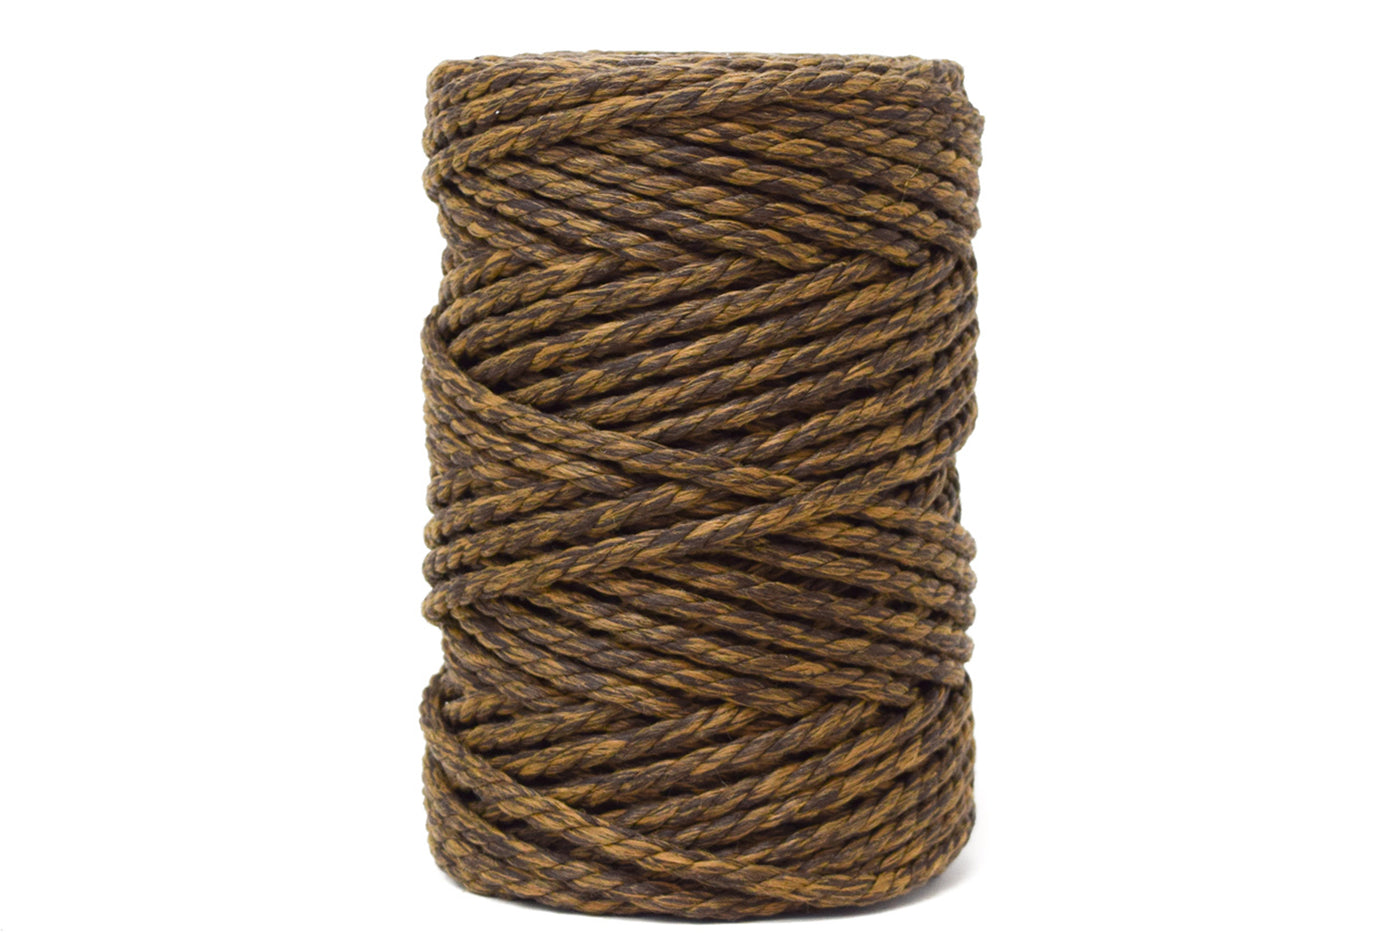 OUTDOORS RECYCLED POLYPROPYLENE ROPE 5 MM - 3 PLY - CHOCOLATE COLOR